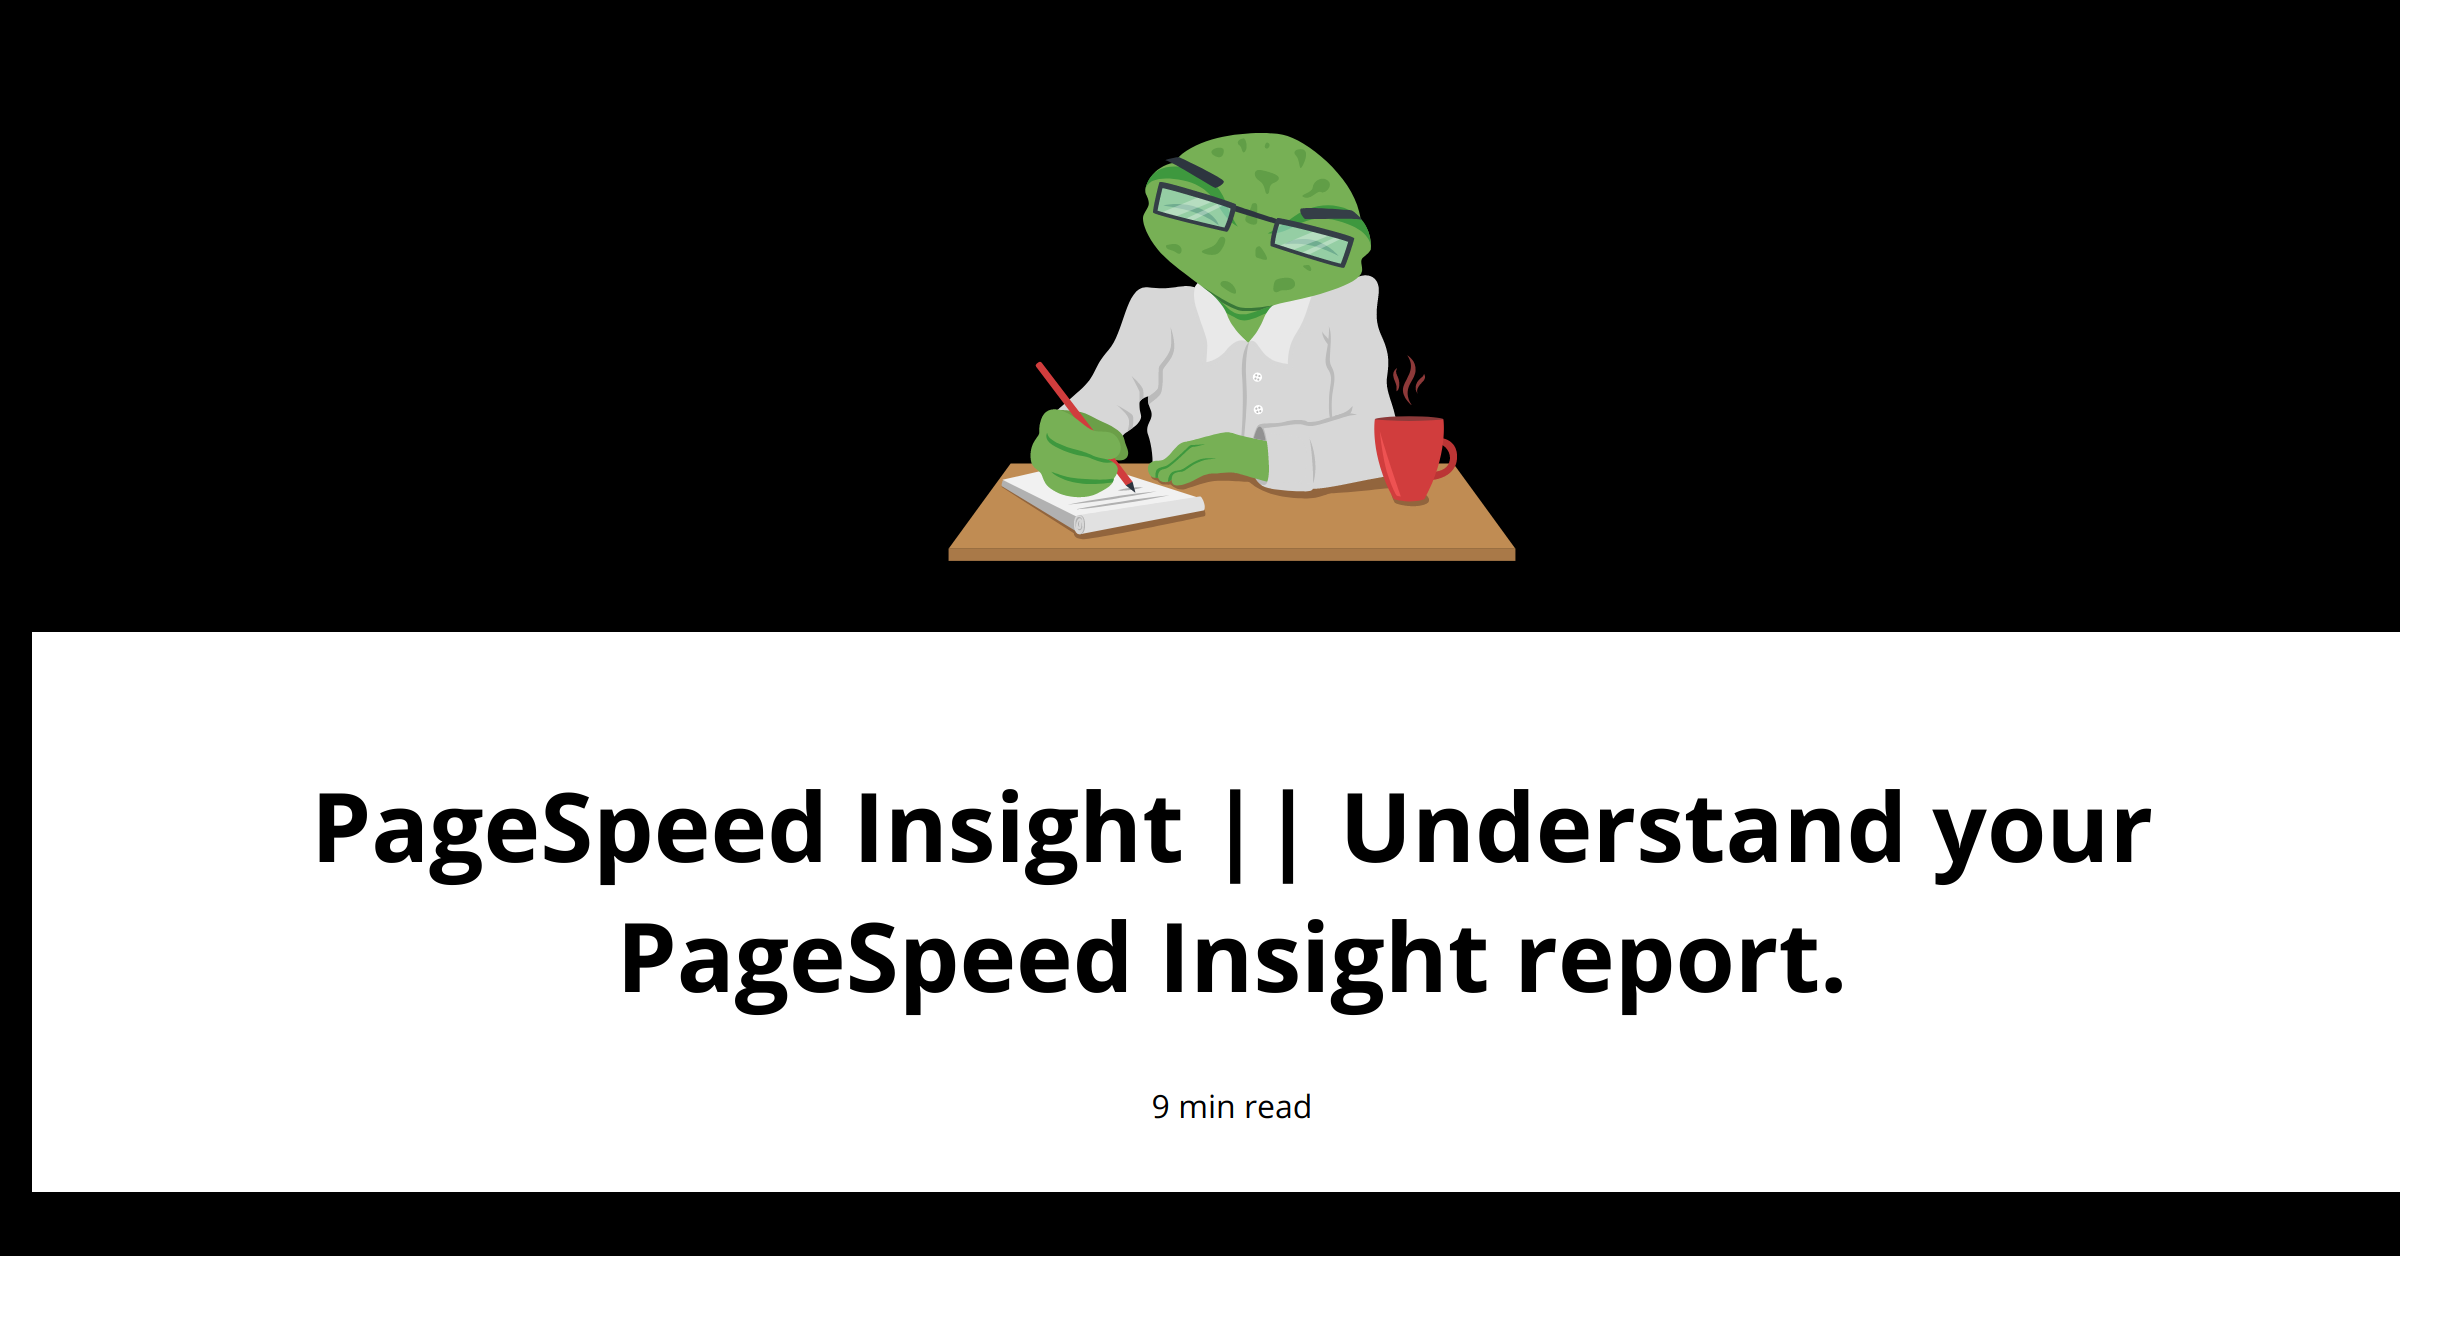 PageSpeed Insight || Understand your PageSpeed Insight report - VitalFrog.